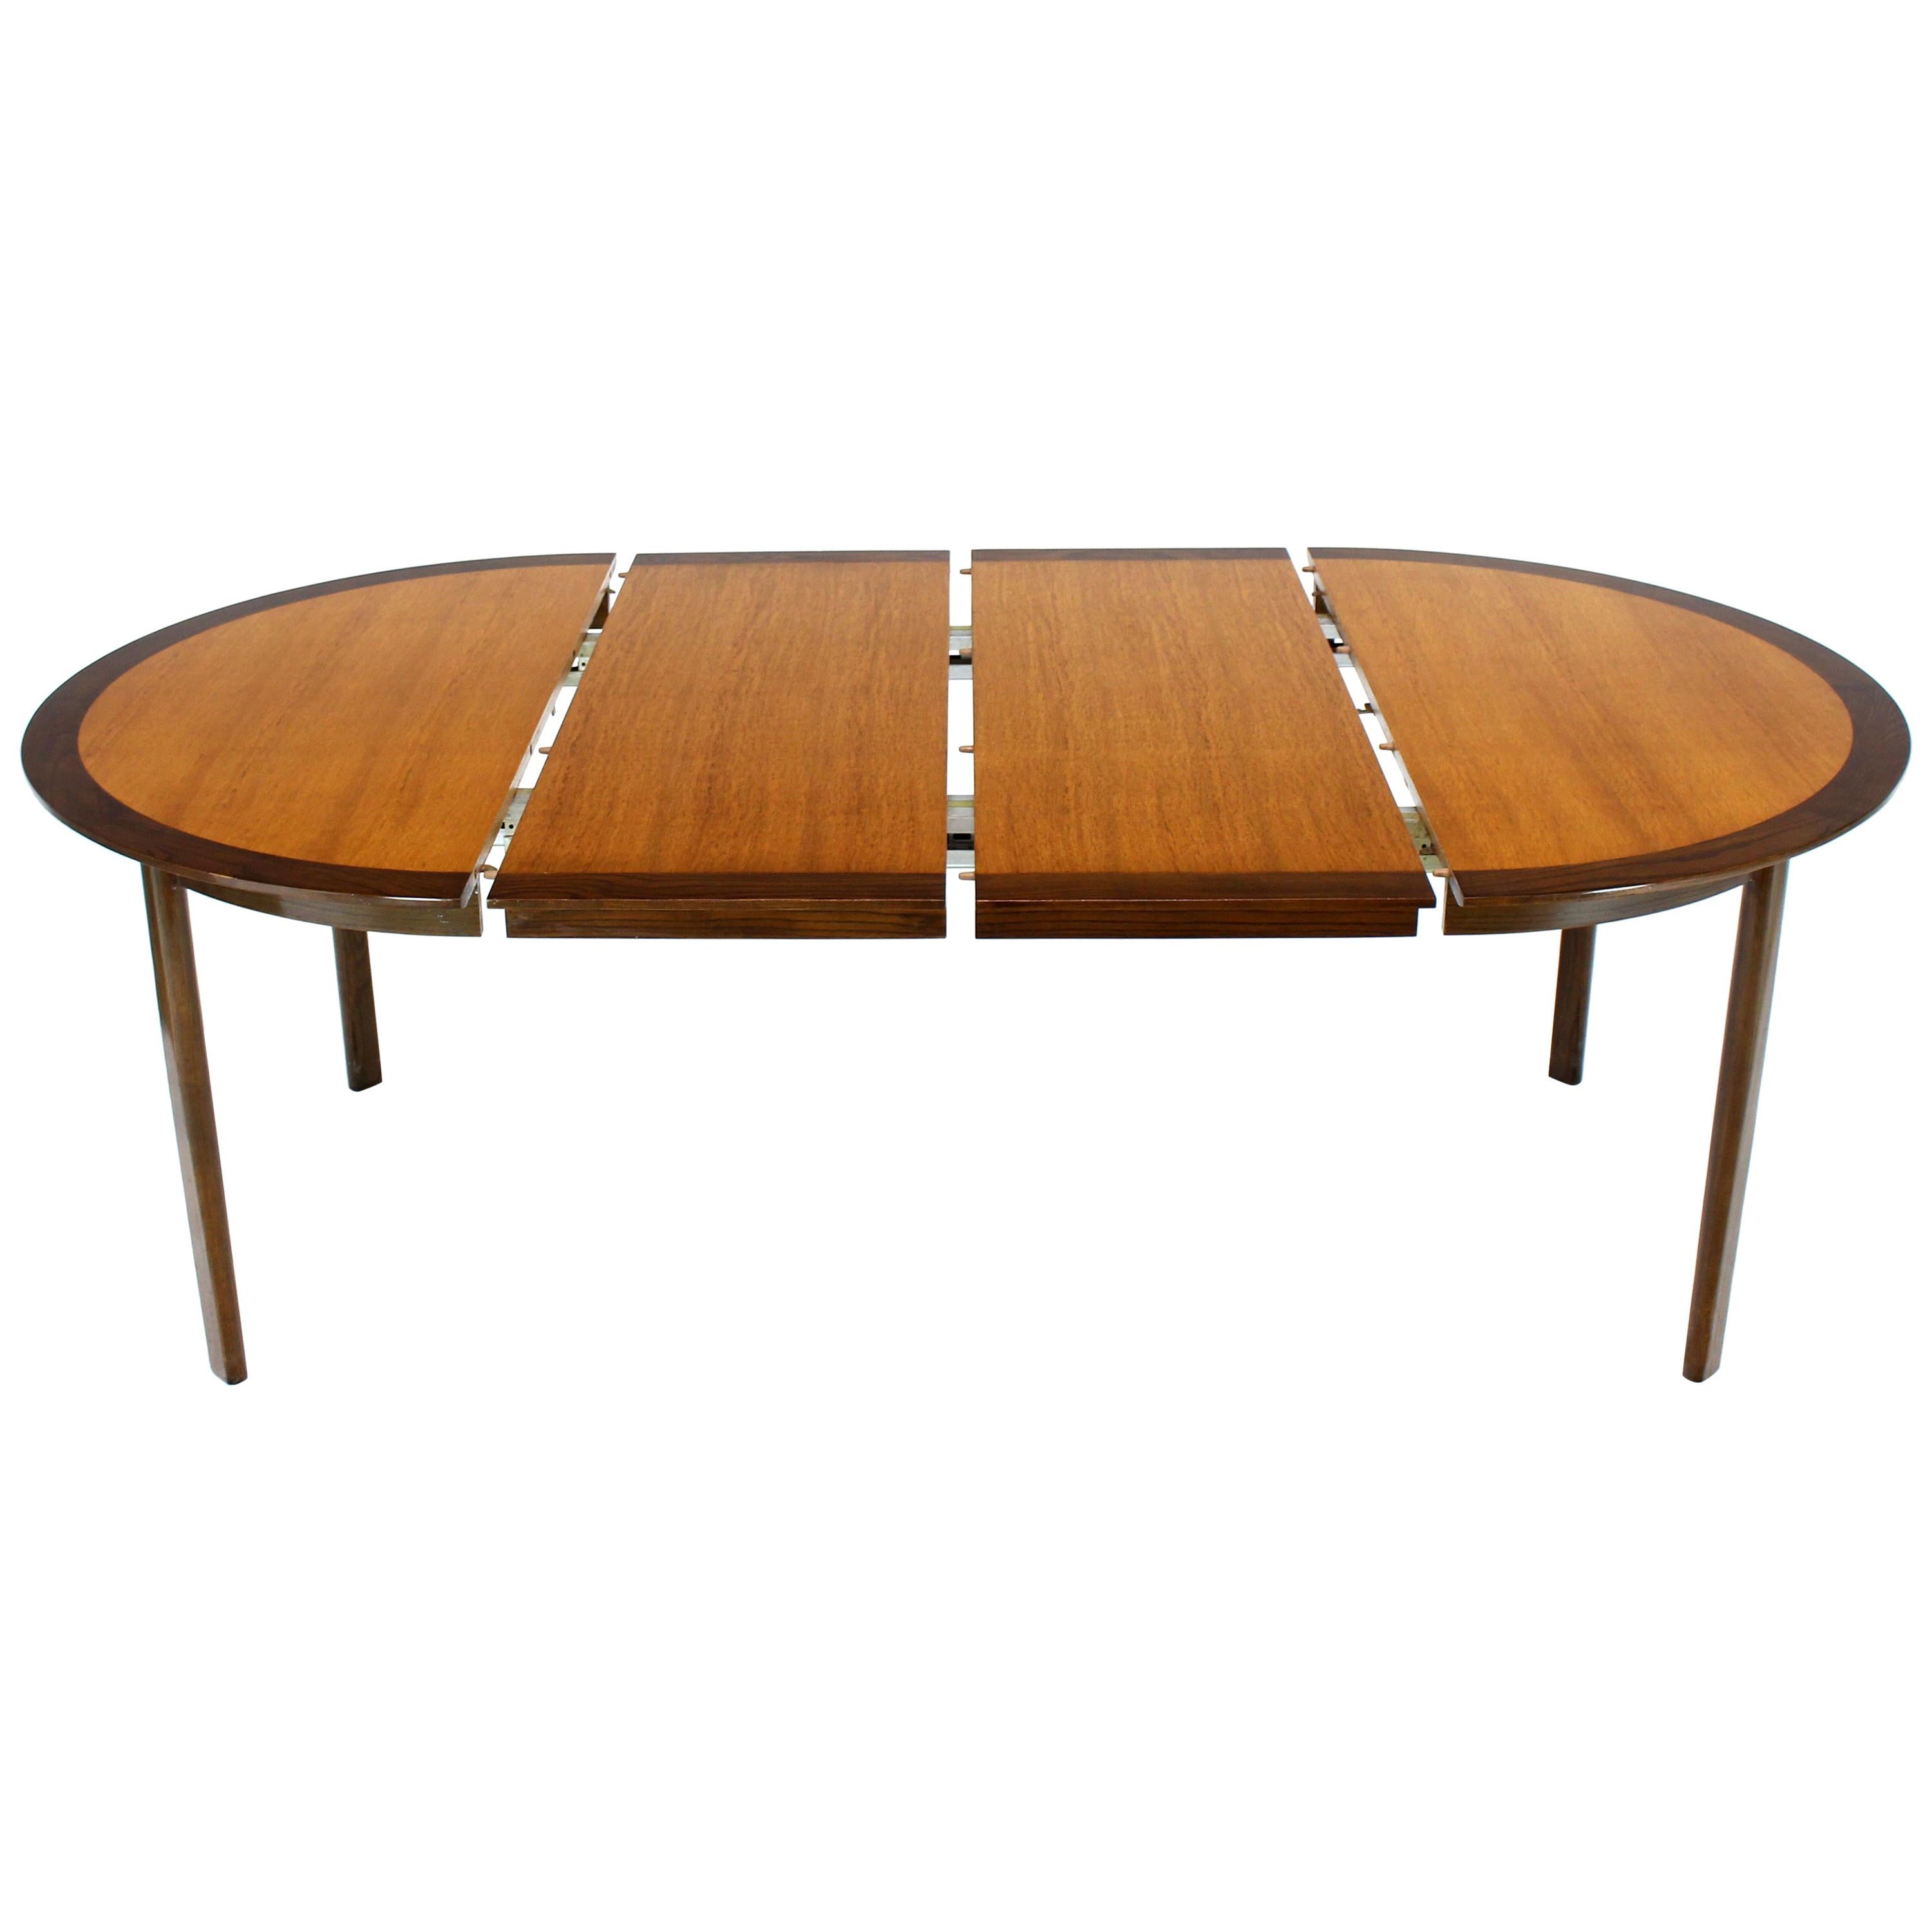 Dunbar Two-Tone Light & Dark Walnut Dining Table with Two Leaves